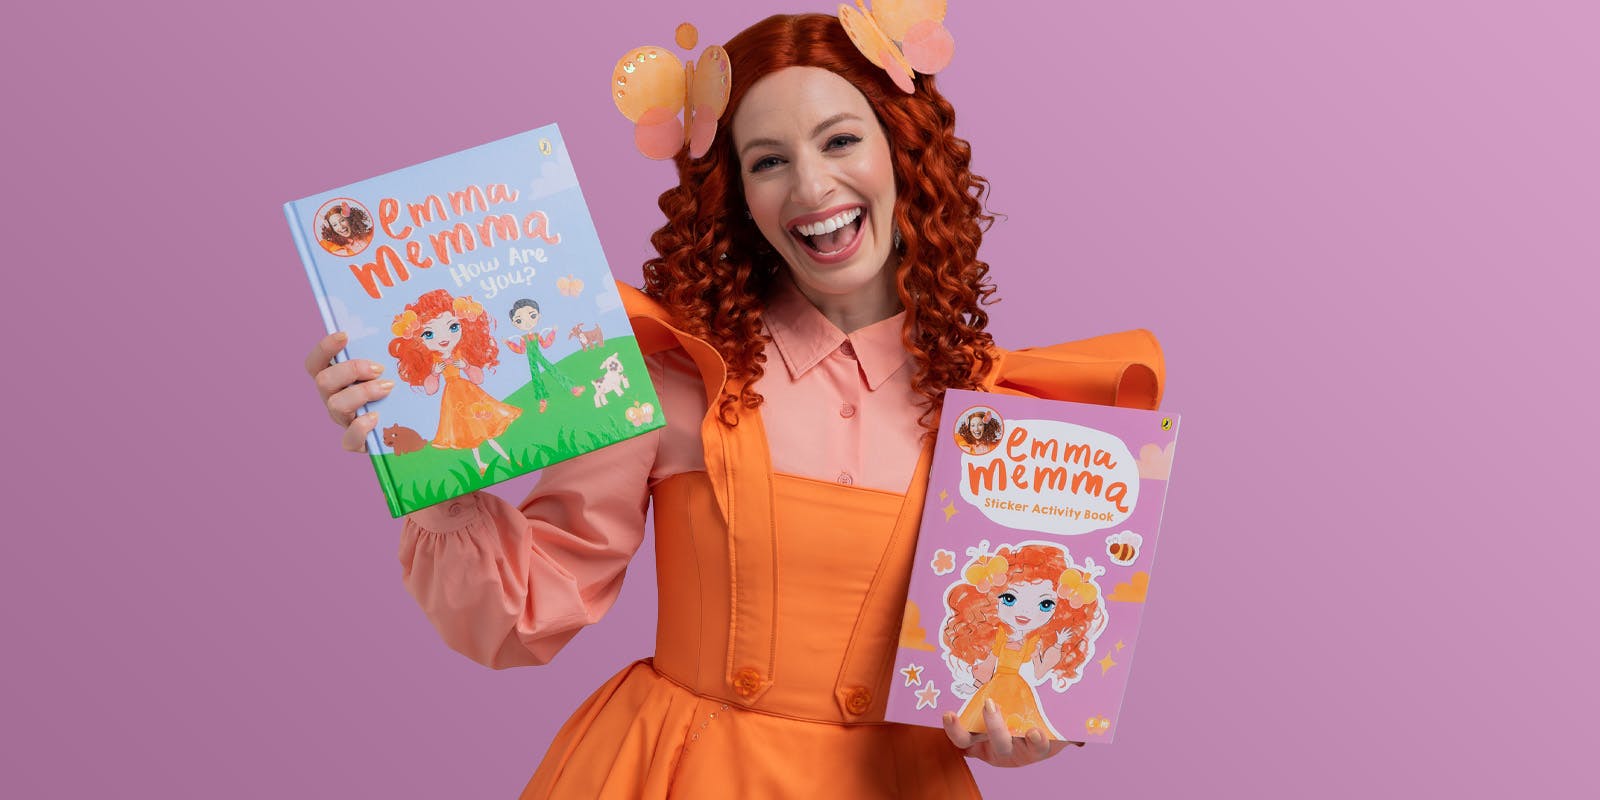 Emma Memma is back on tour to promote her two new books!